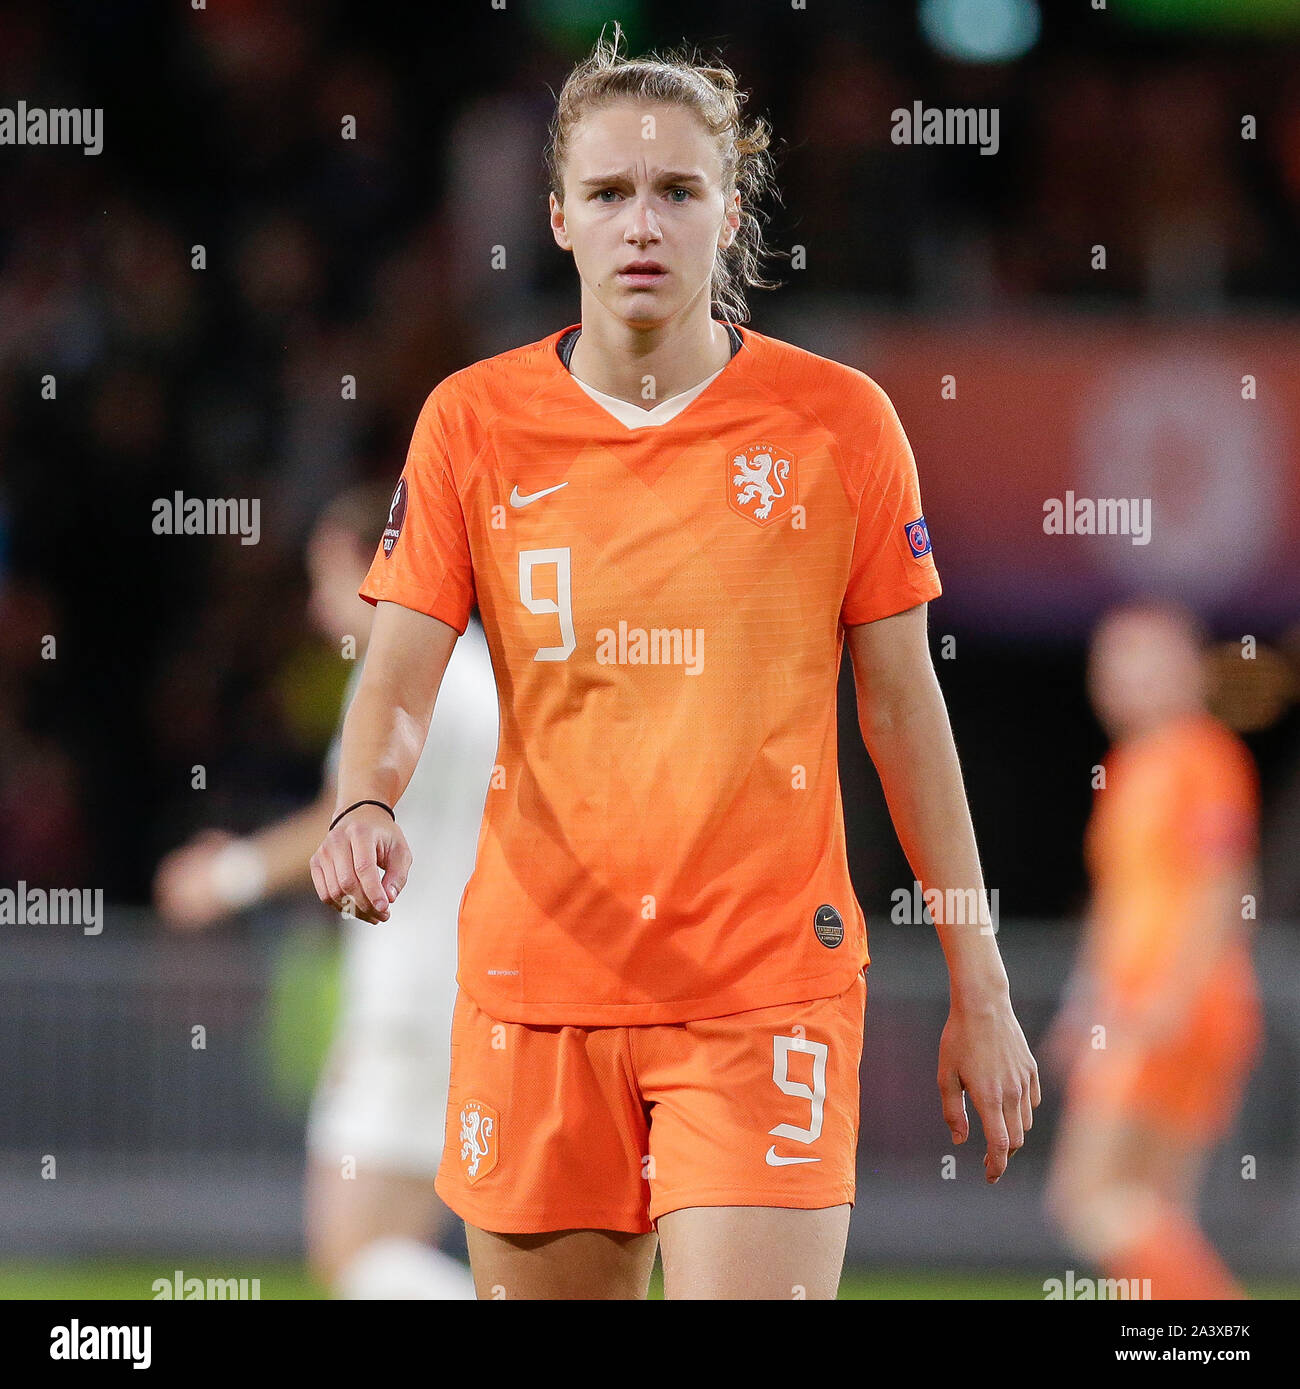 8 October 2019 Eindhoven, The Netherlands Soccer Women’s International Game The Netherlands v Russia   Vivianne Miedema of The Netherlands Stock Photo